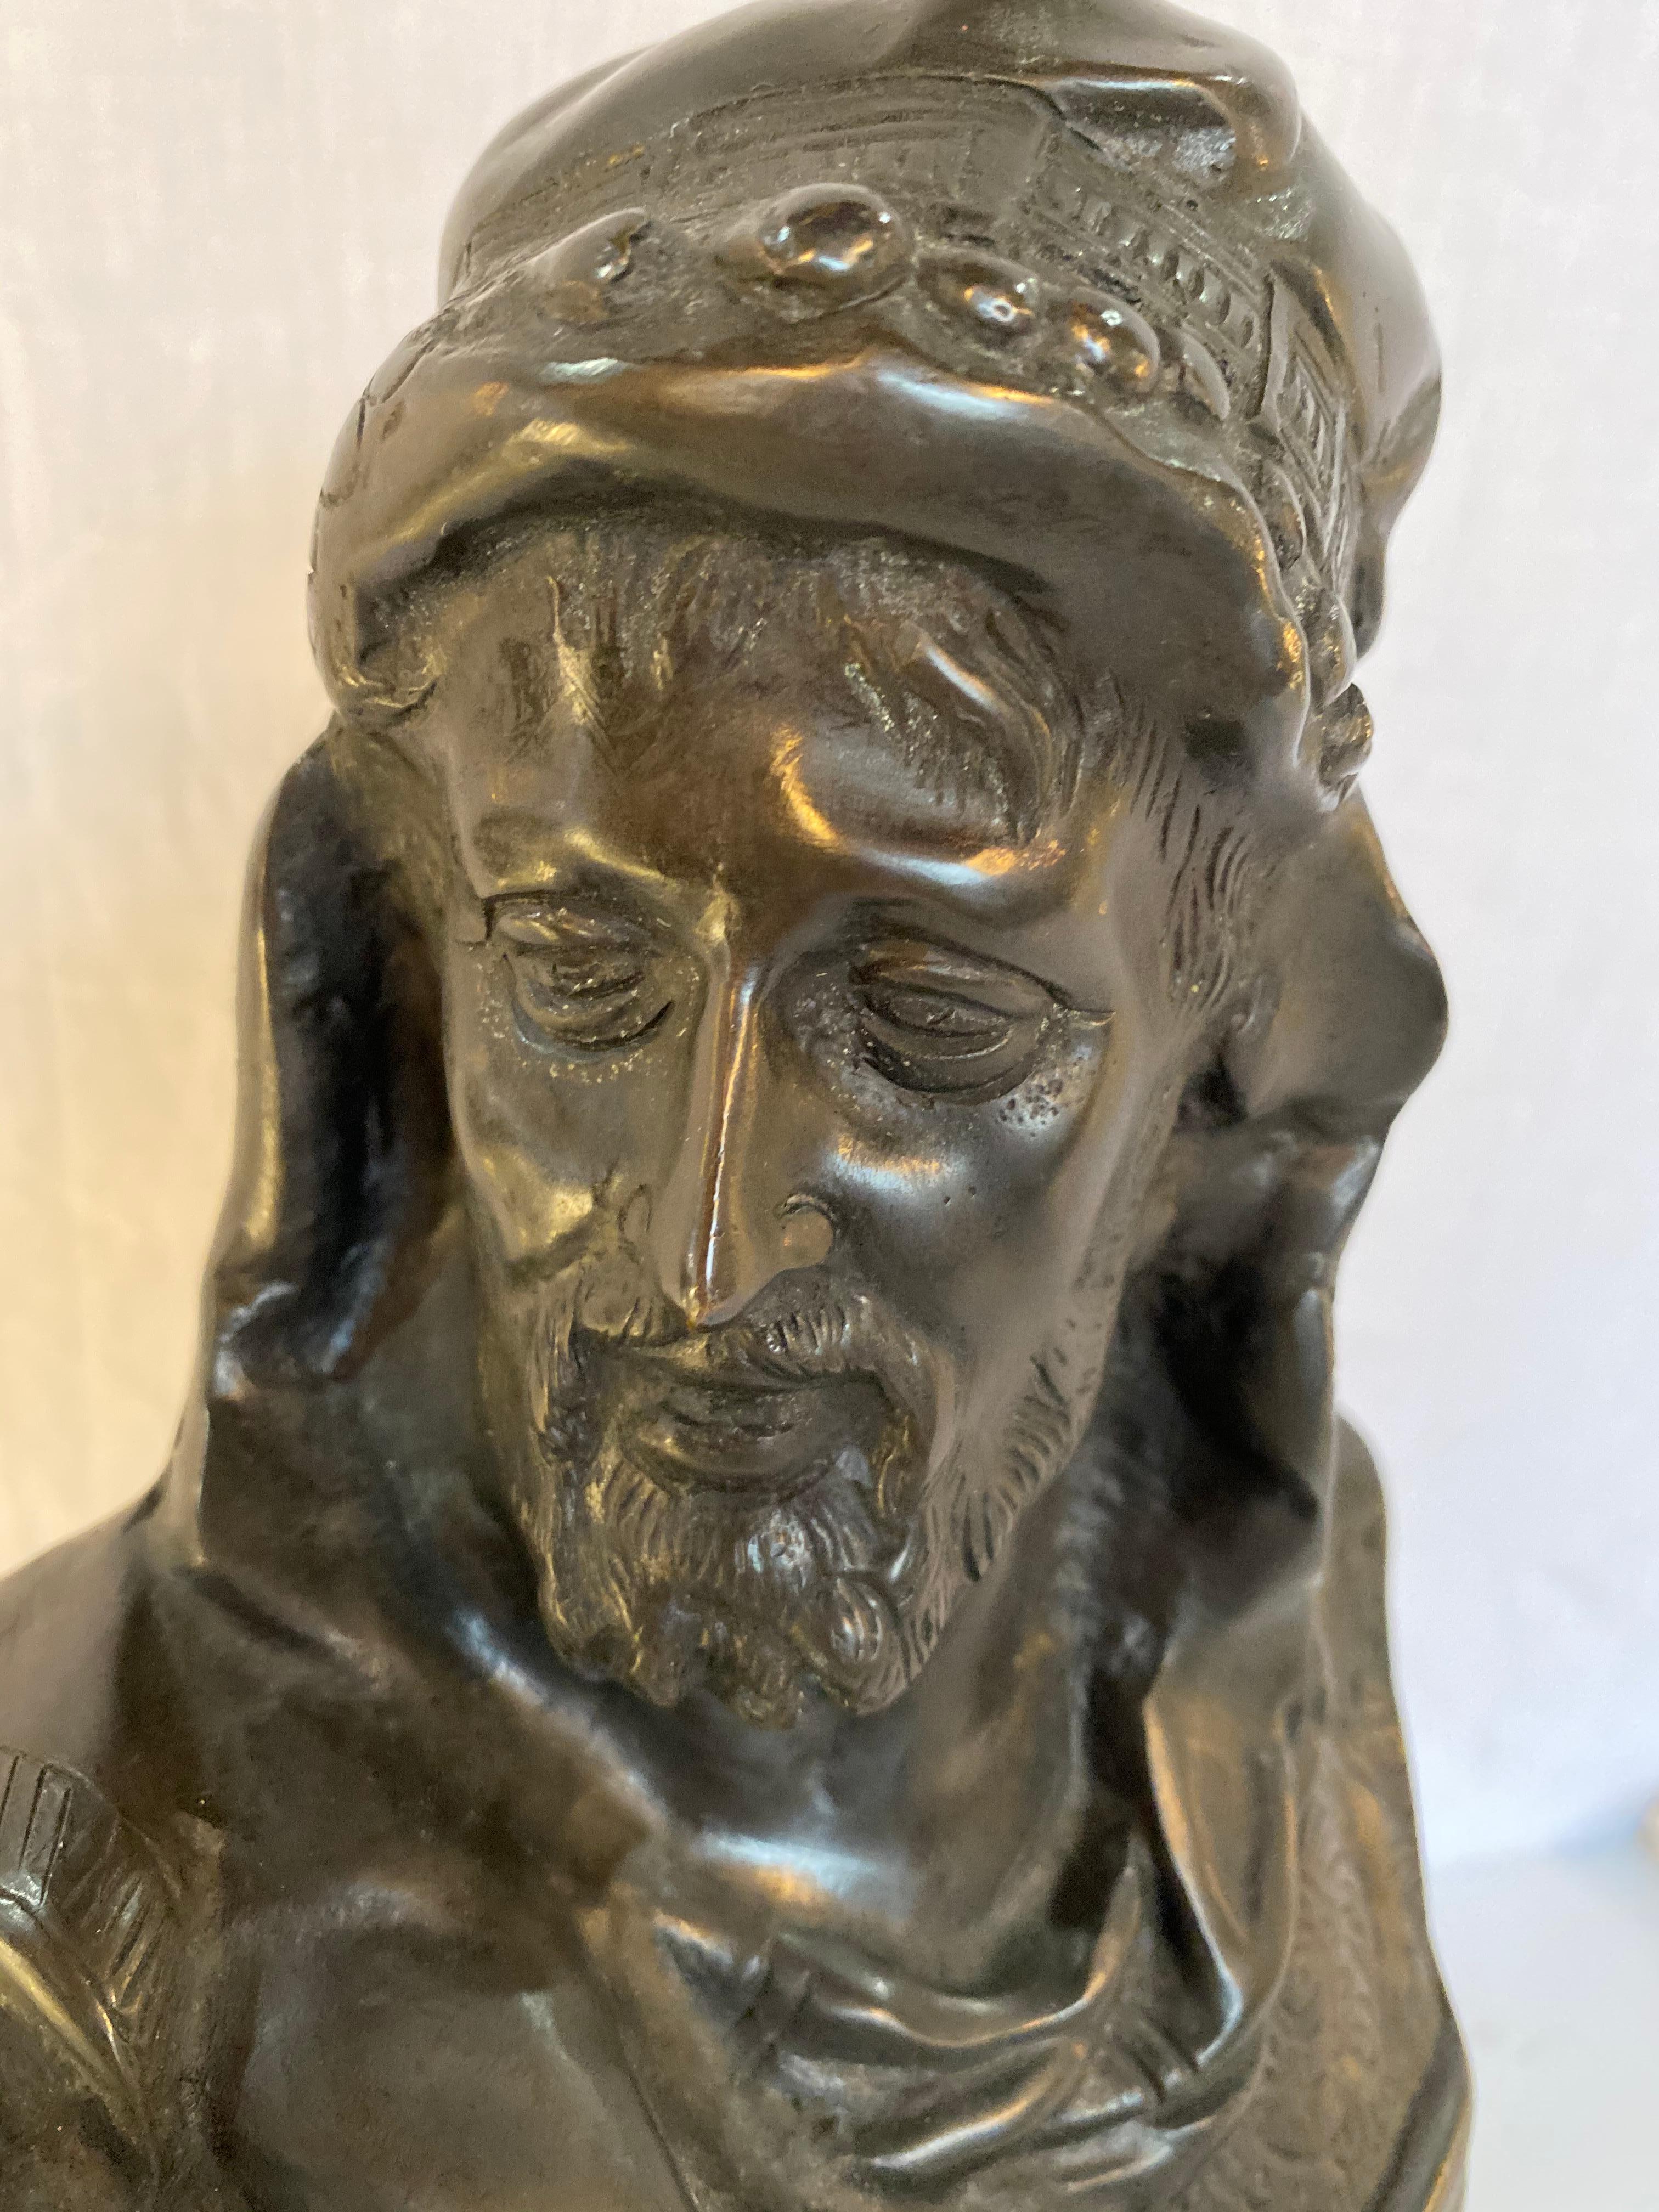 Bronze bust of an Arabian man on marble plinth. A finely cast bronze of an Arab from the 1920s.